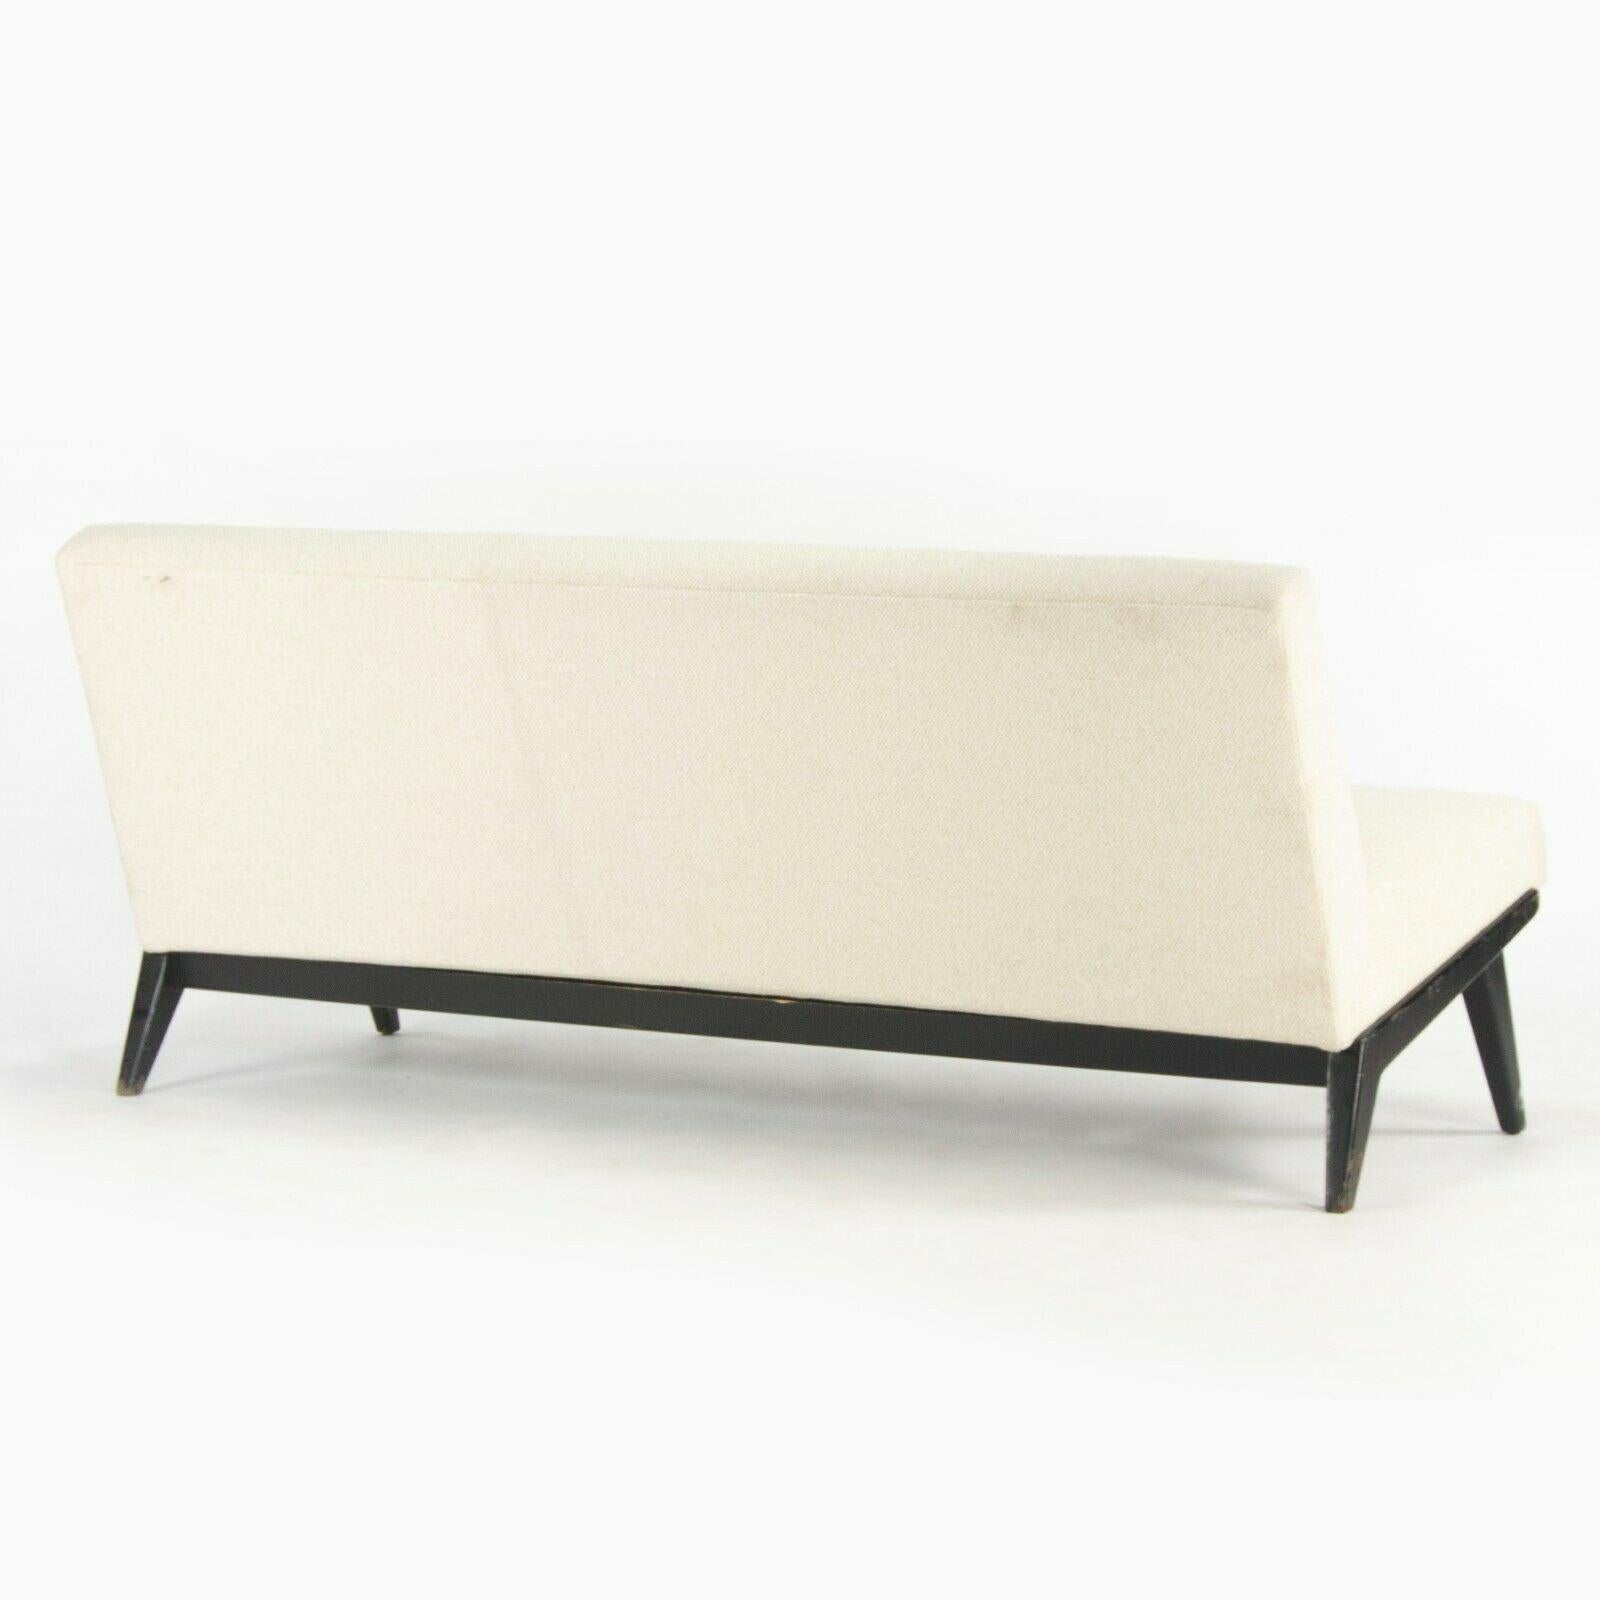 1949 Jens Risom No. 23 Sofa with New Upholstery Signed H.G. Knoll Products For Sale 1